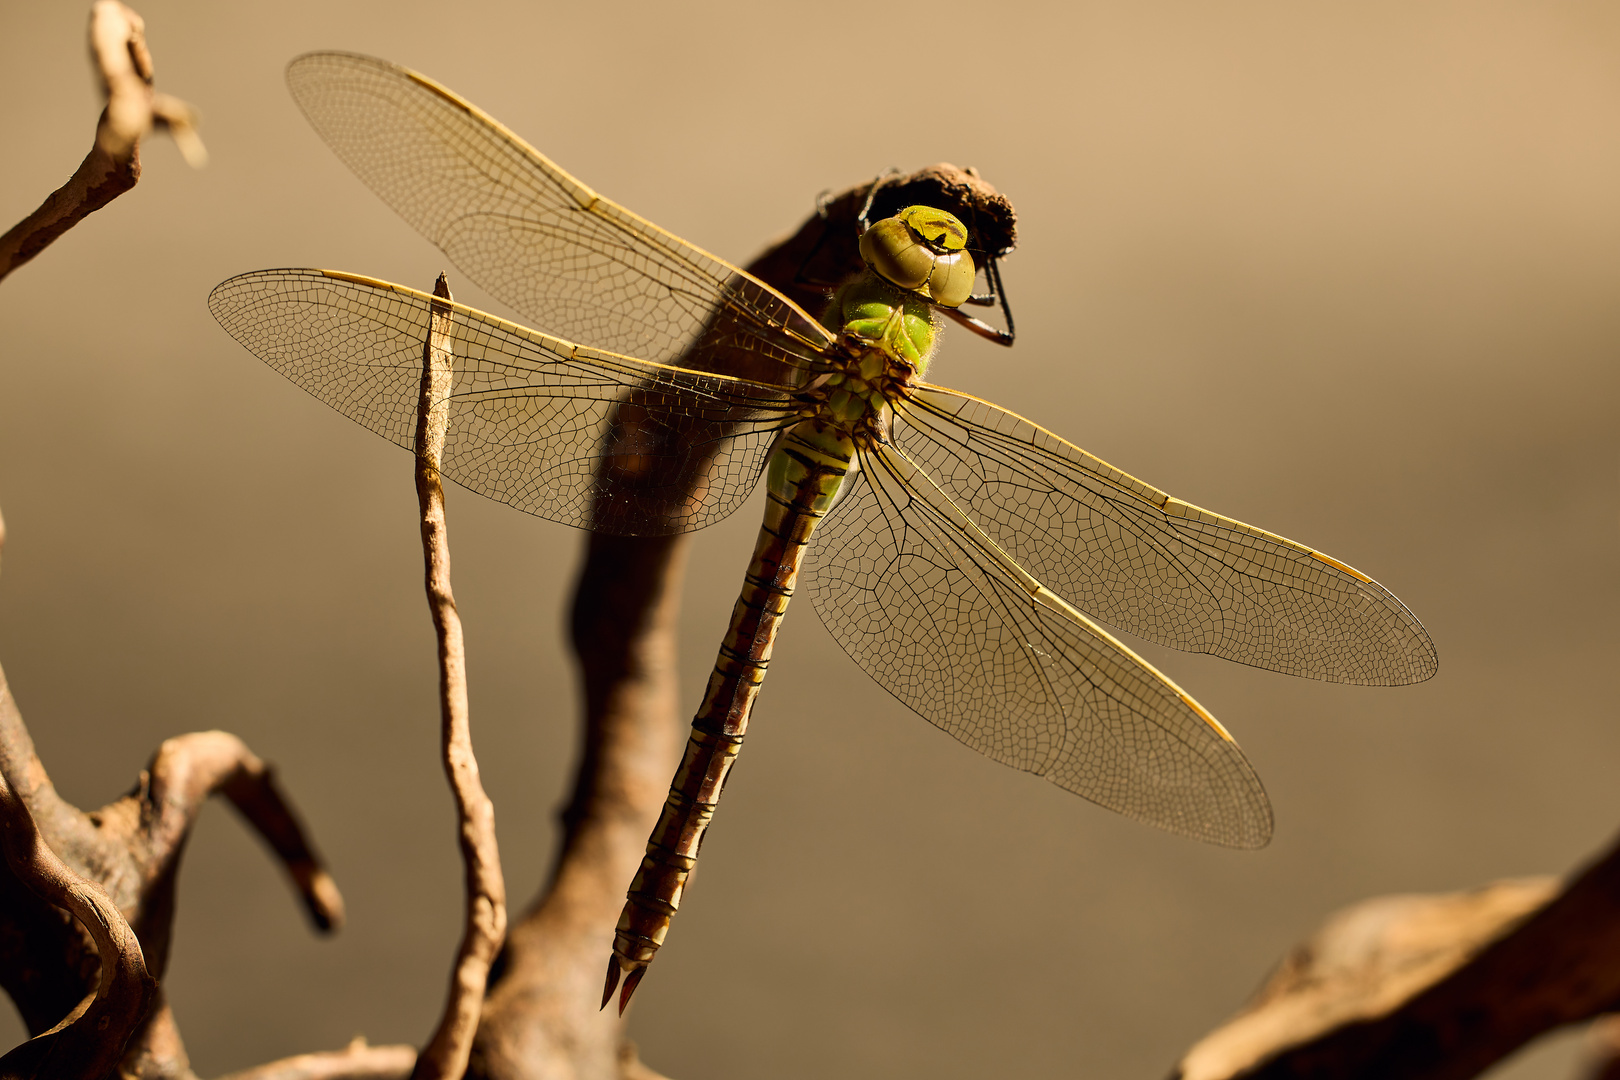 Dragonfly2_Tobias_Ritter